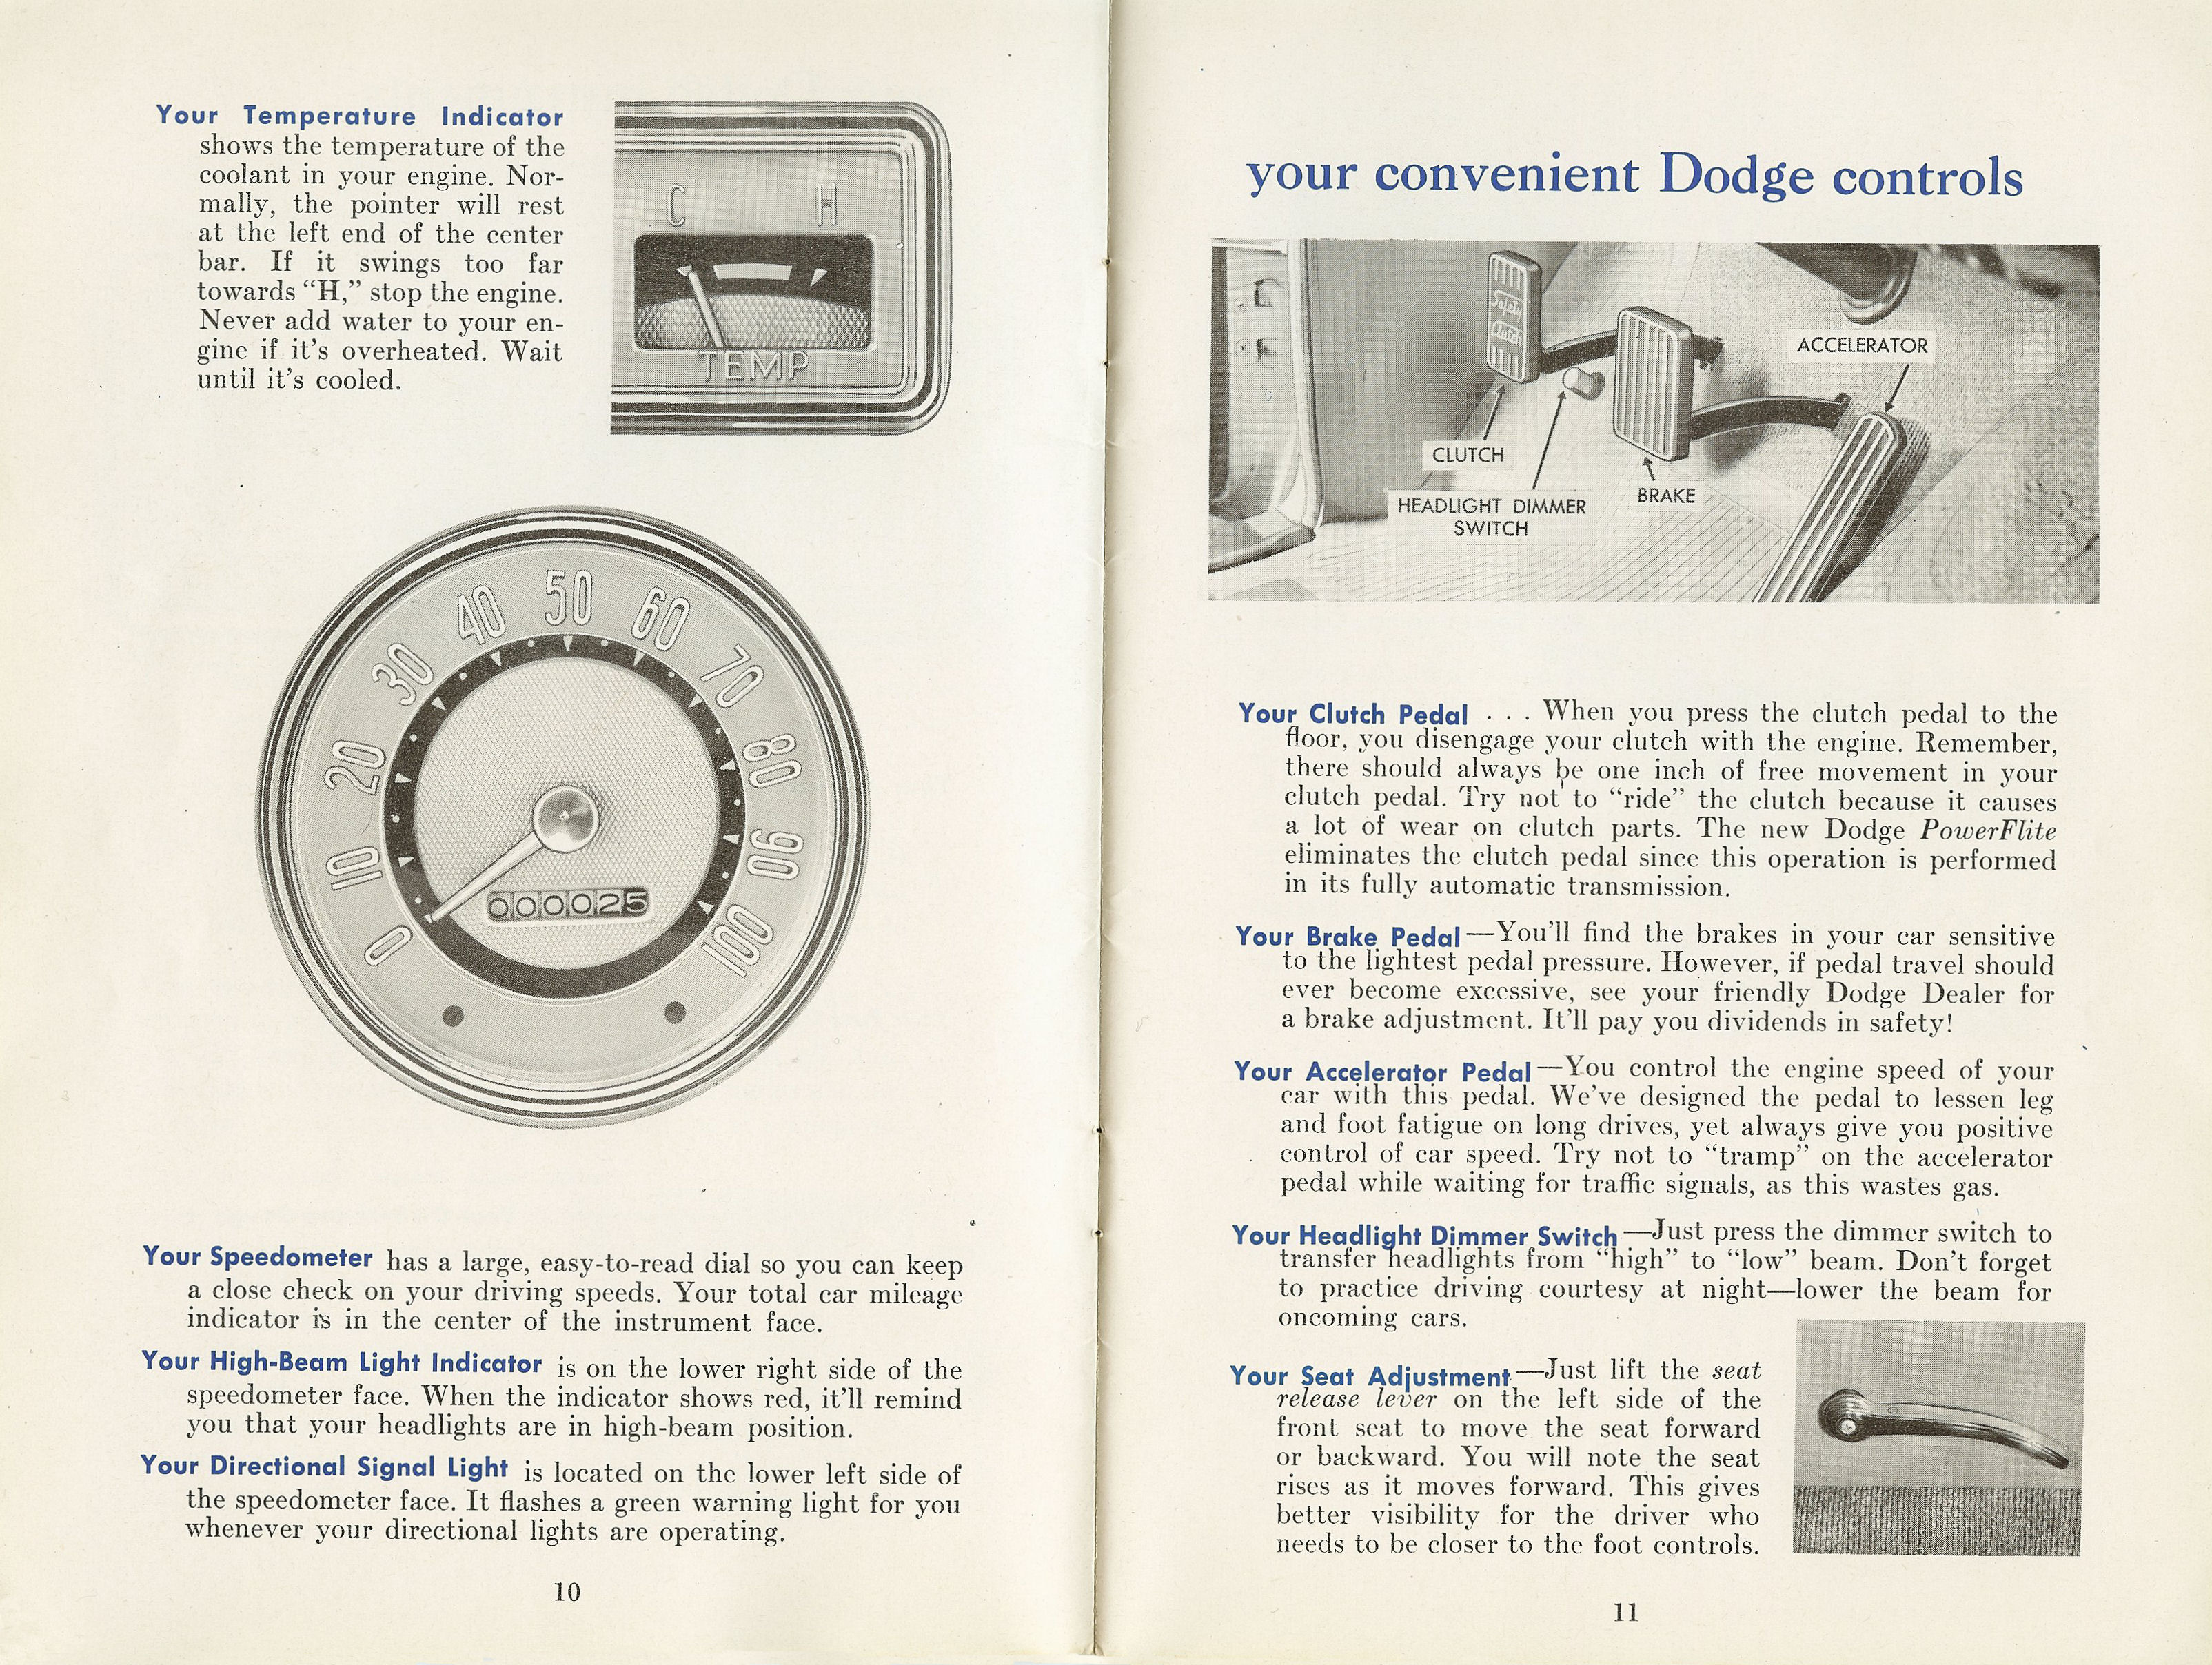 1954 Dodge Car Owners Manual Page 28